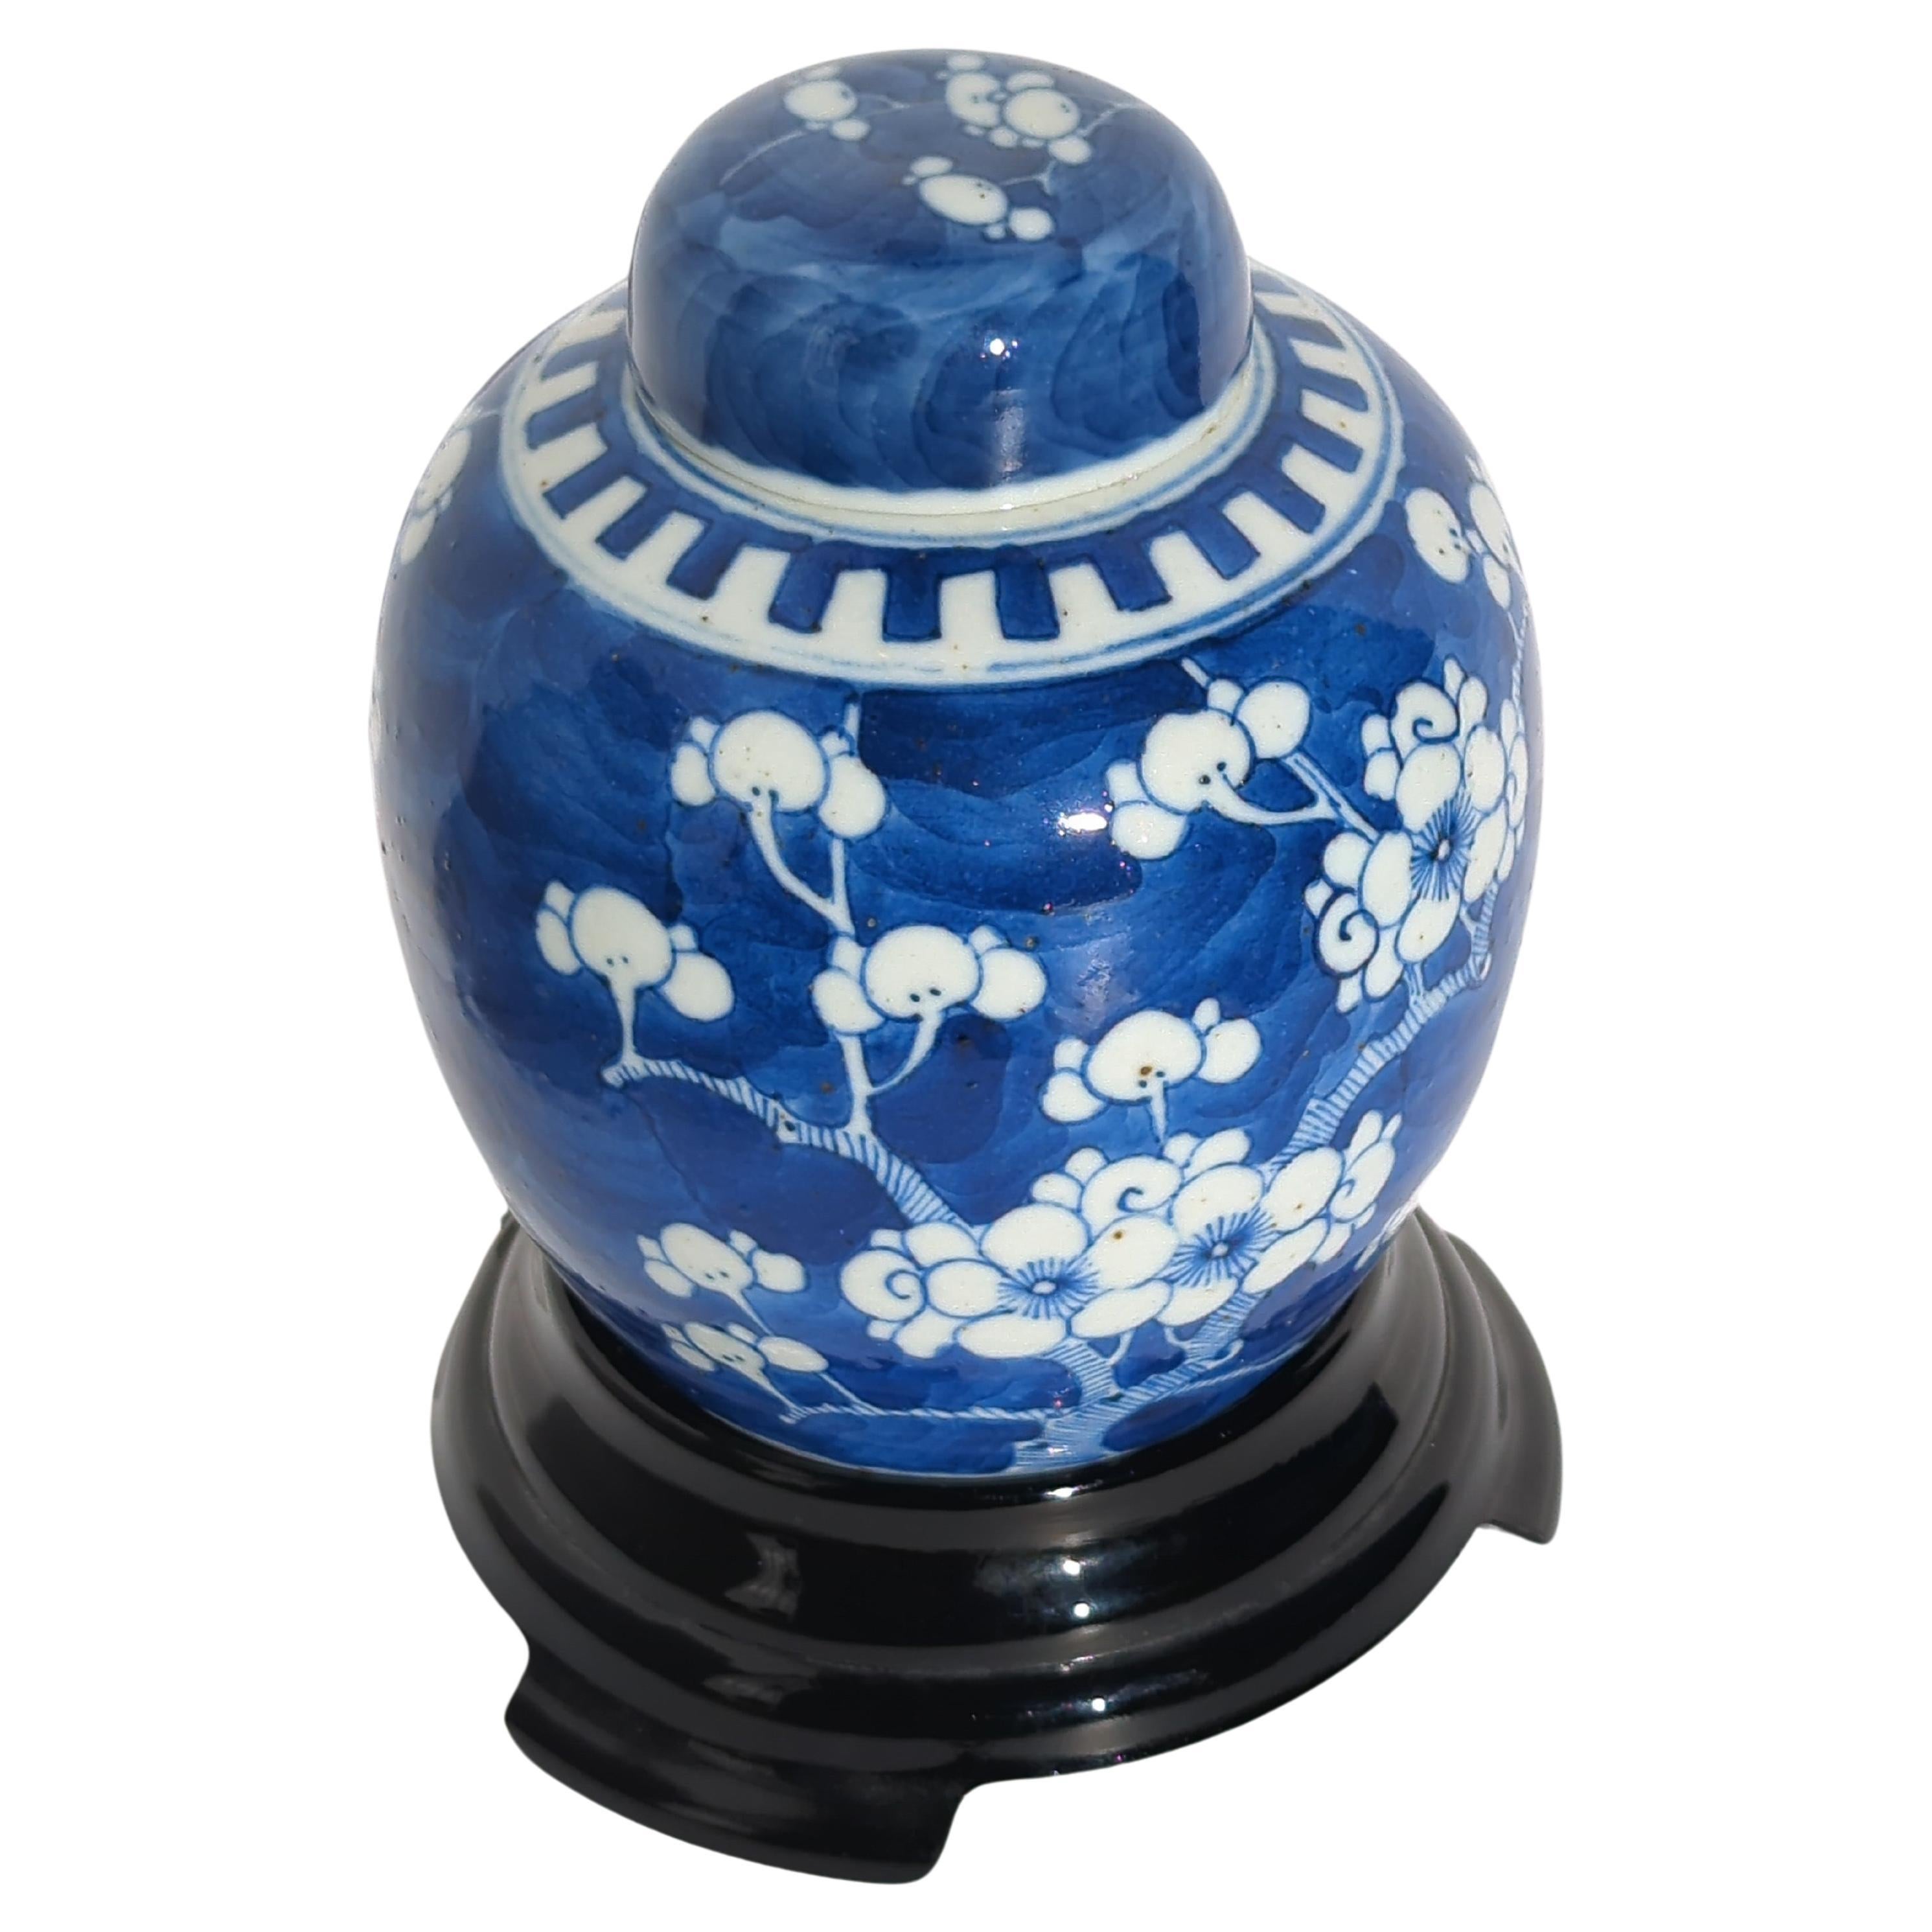 Hand-Painted Antique Chinese Blue & White Prunus Blossoms Covered Ginger Jar Vase Early 20c